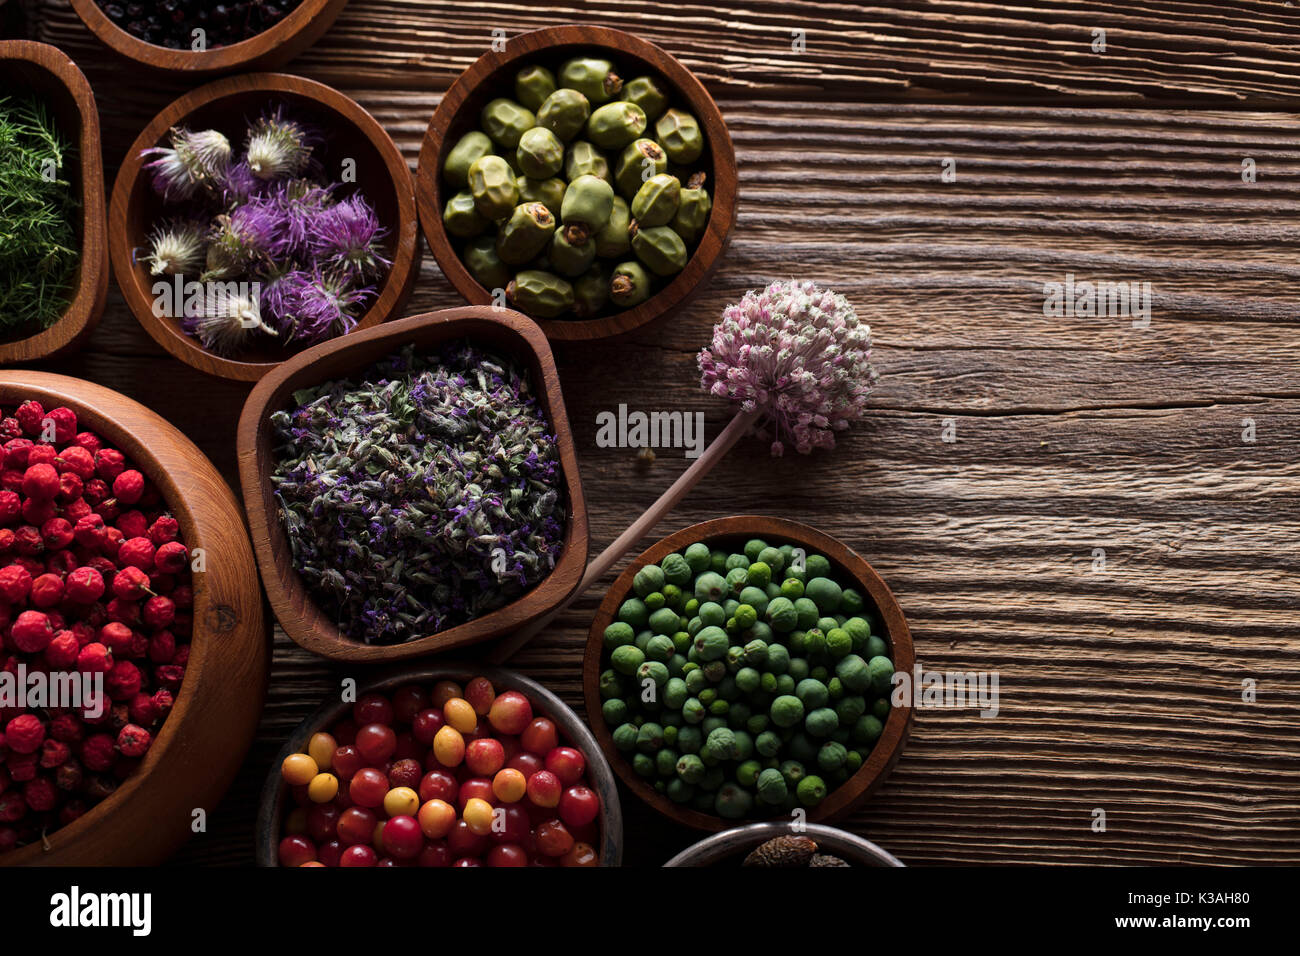 Natural medicine.  Herbs, berries and flowers in bowls on wooden table. Stock Photo